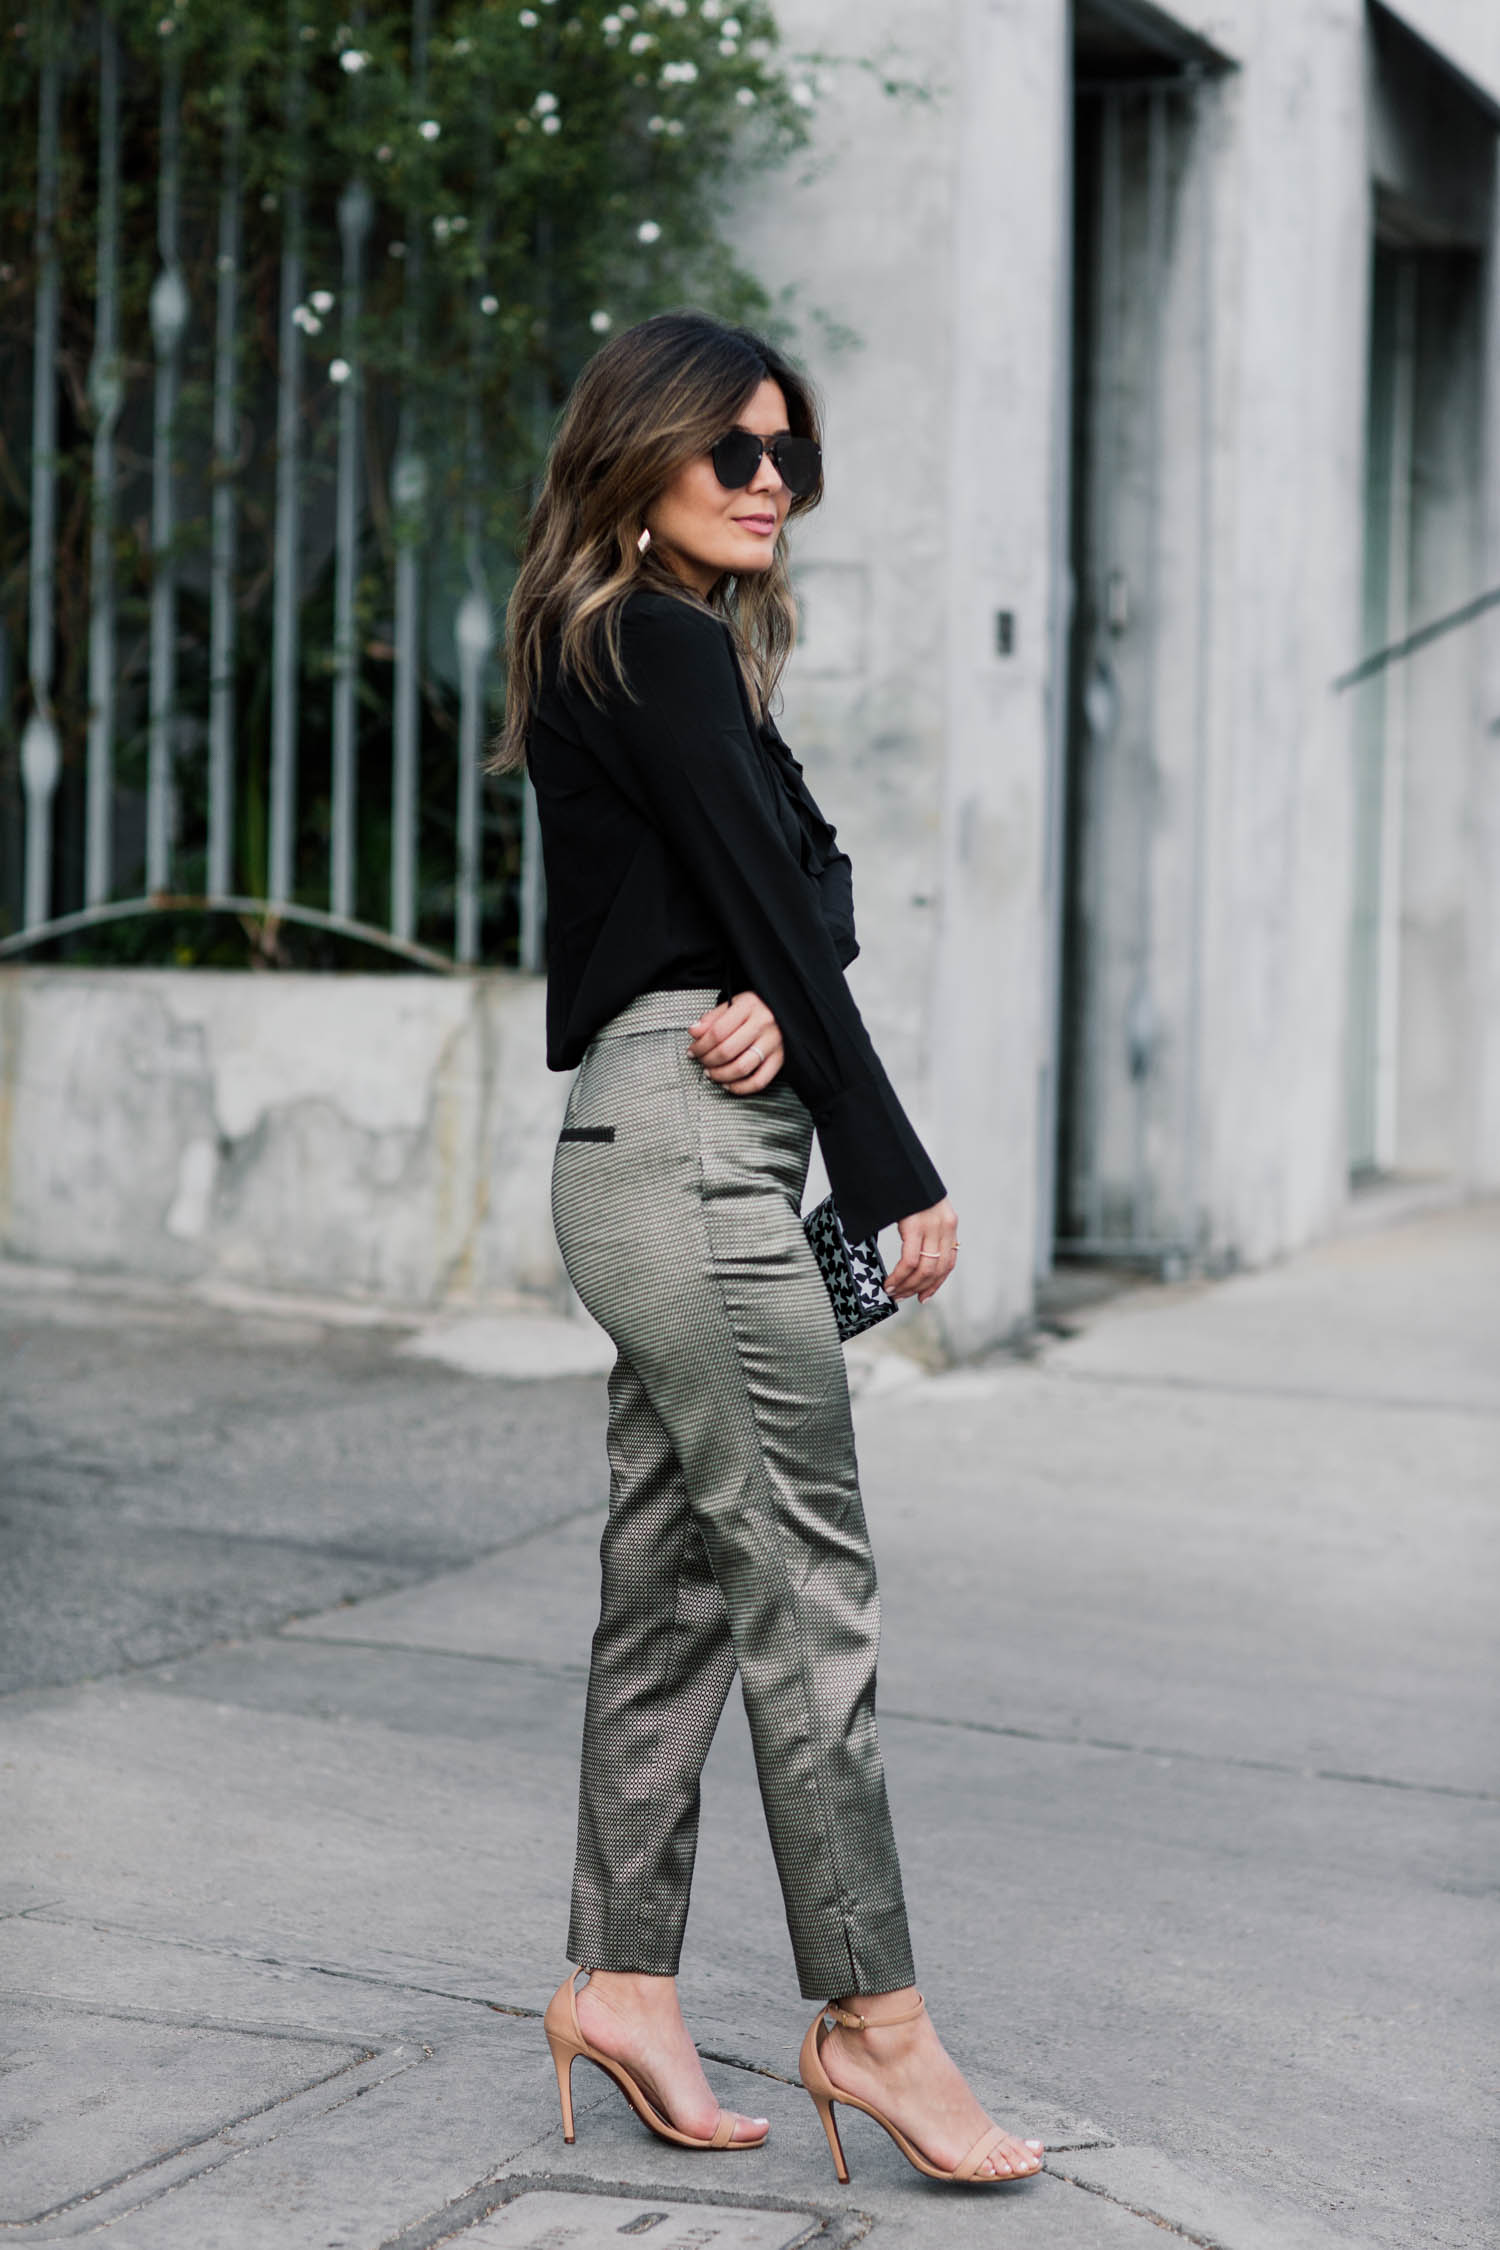 Magnificent in Metallic Pants | Ann Taylor | Style MBA